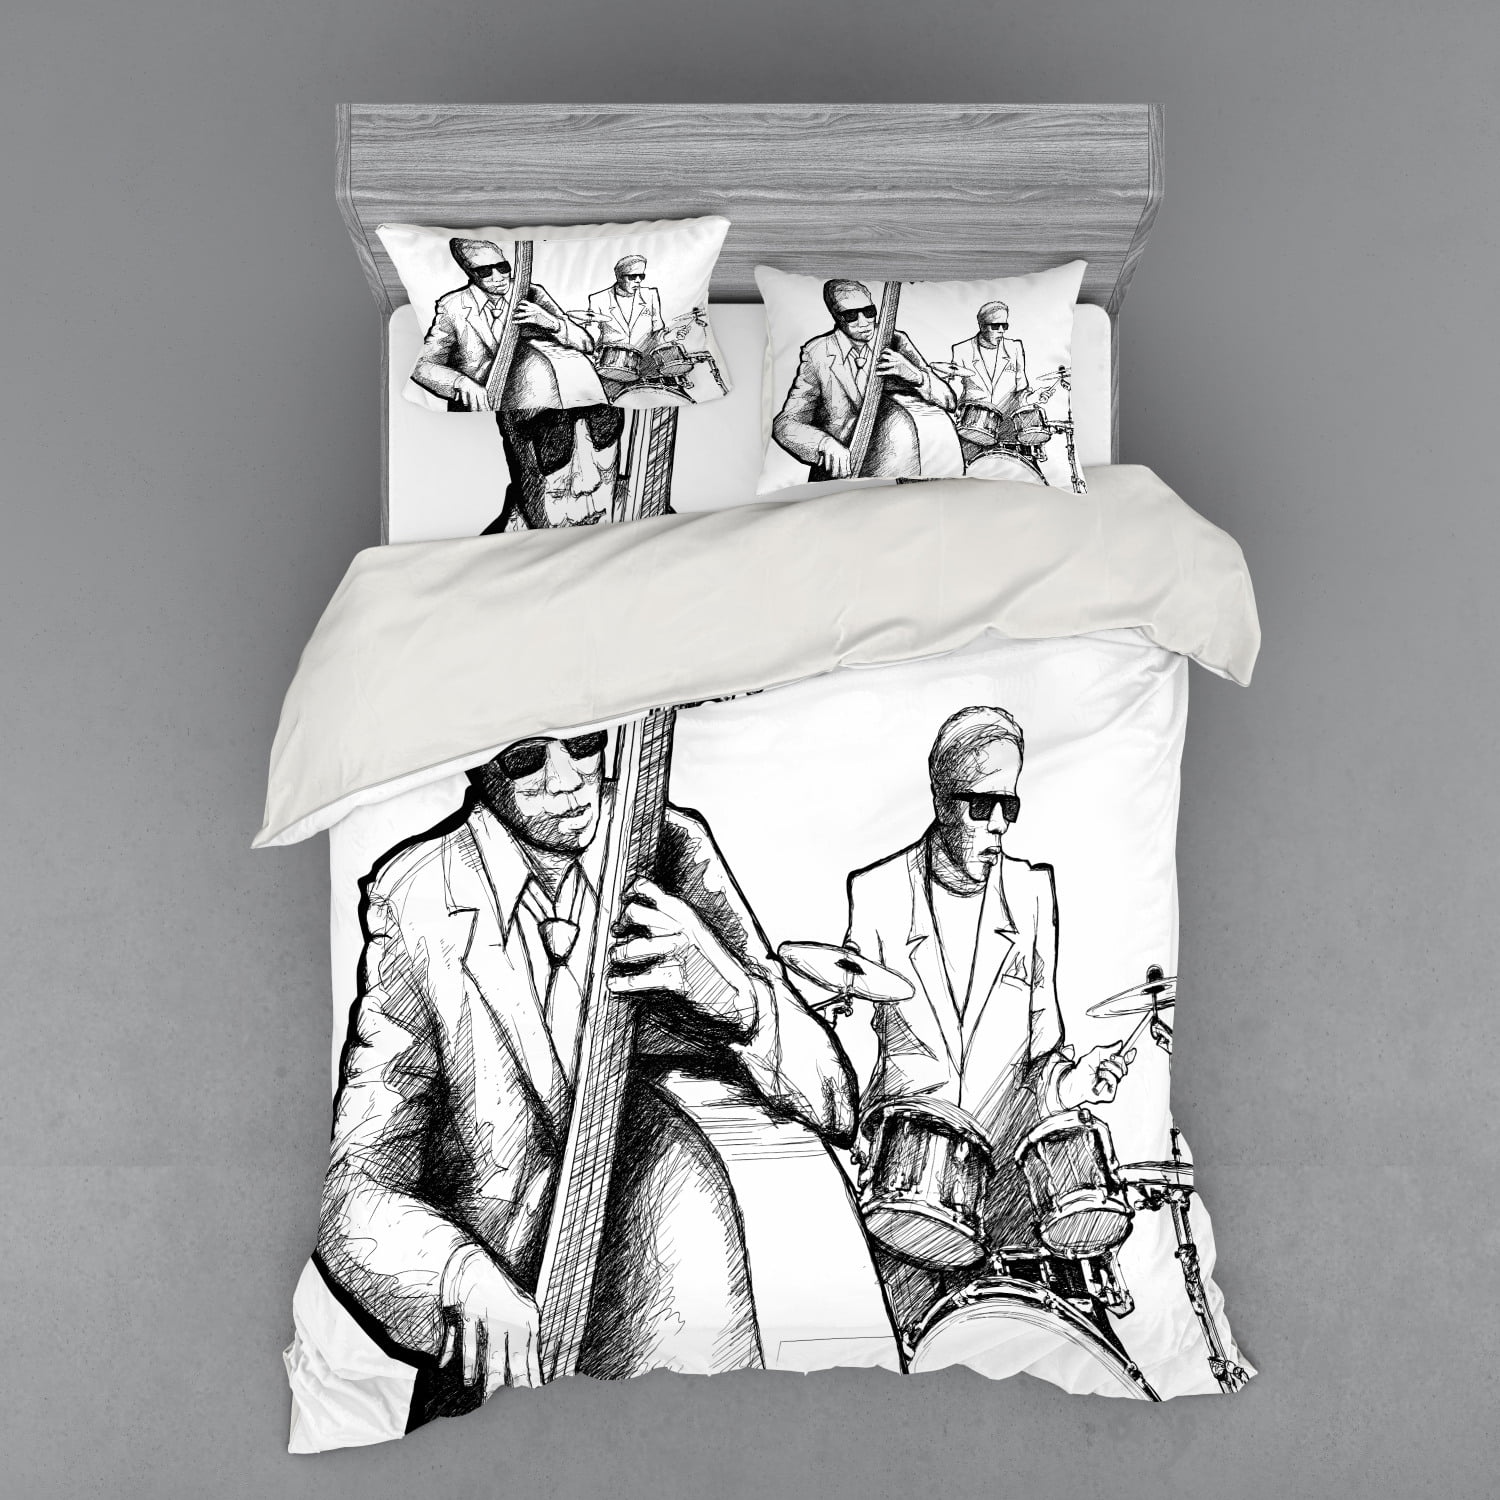 Pile of Graphic Colorful Electric Guitars Rock Music Stringed Instruments Black Coral Decorative 2 Piece Bedding Set with 1 Pillow Sham Ambesonne Popstar Party Duvet Cover Set Twin Size